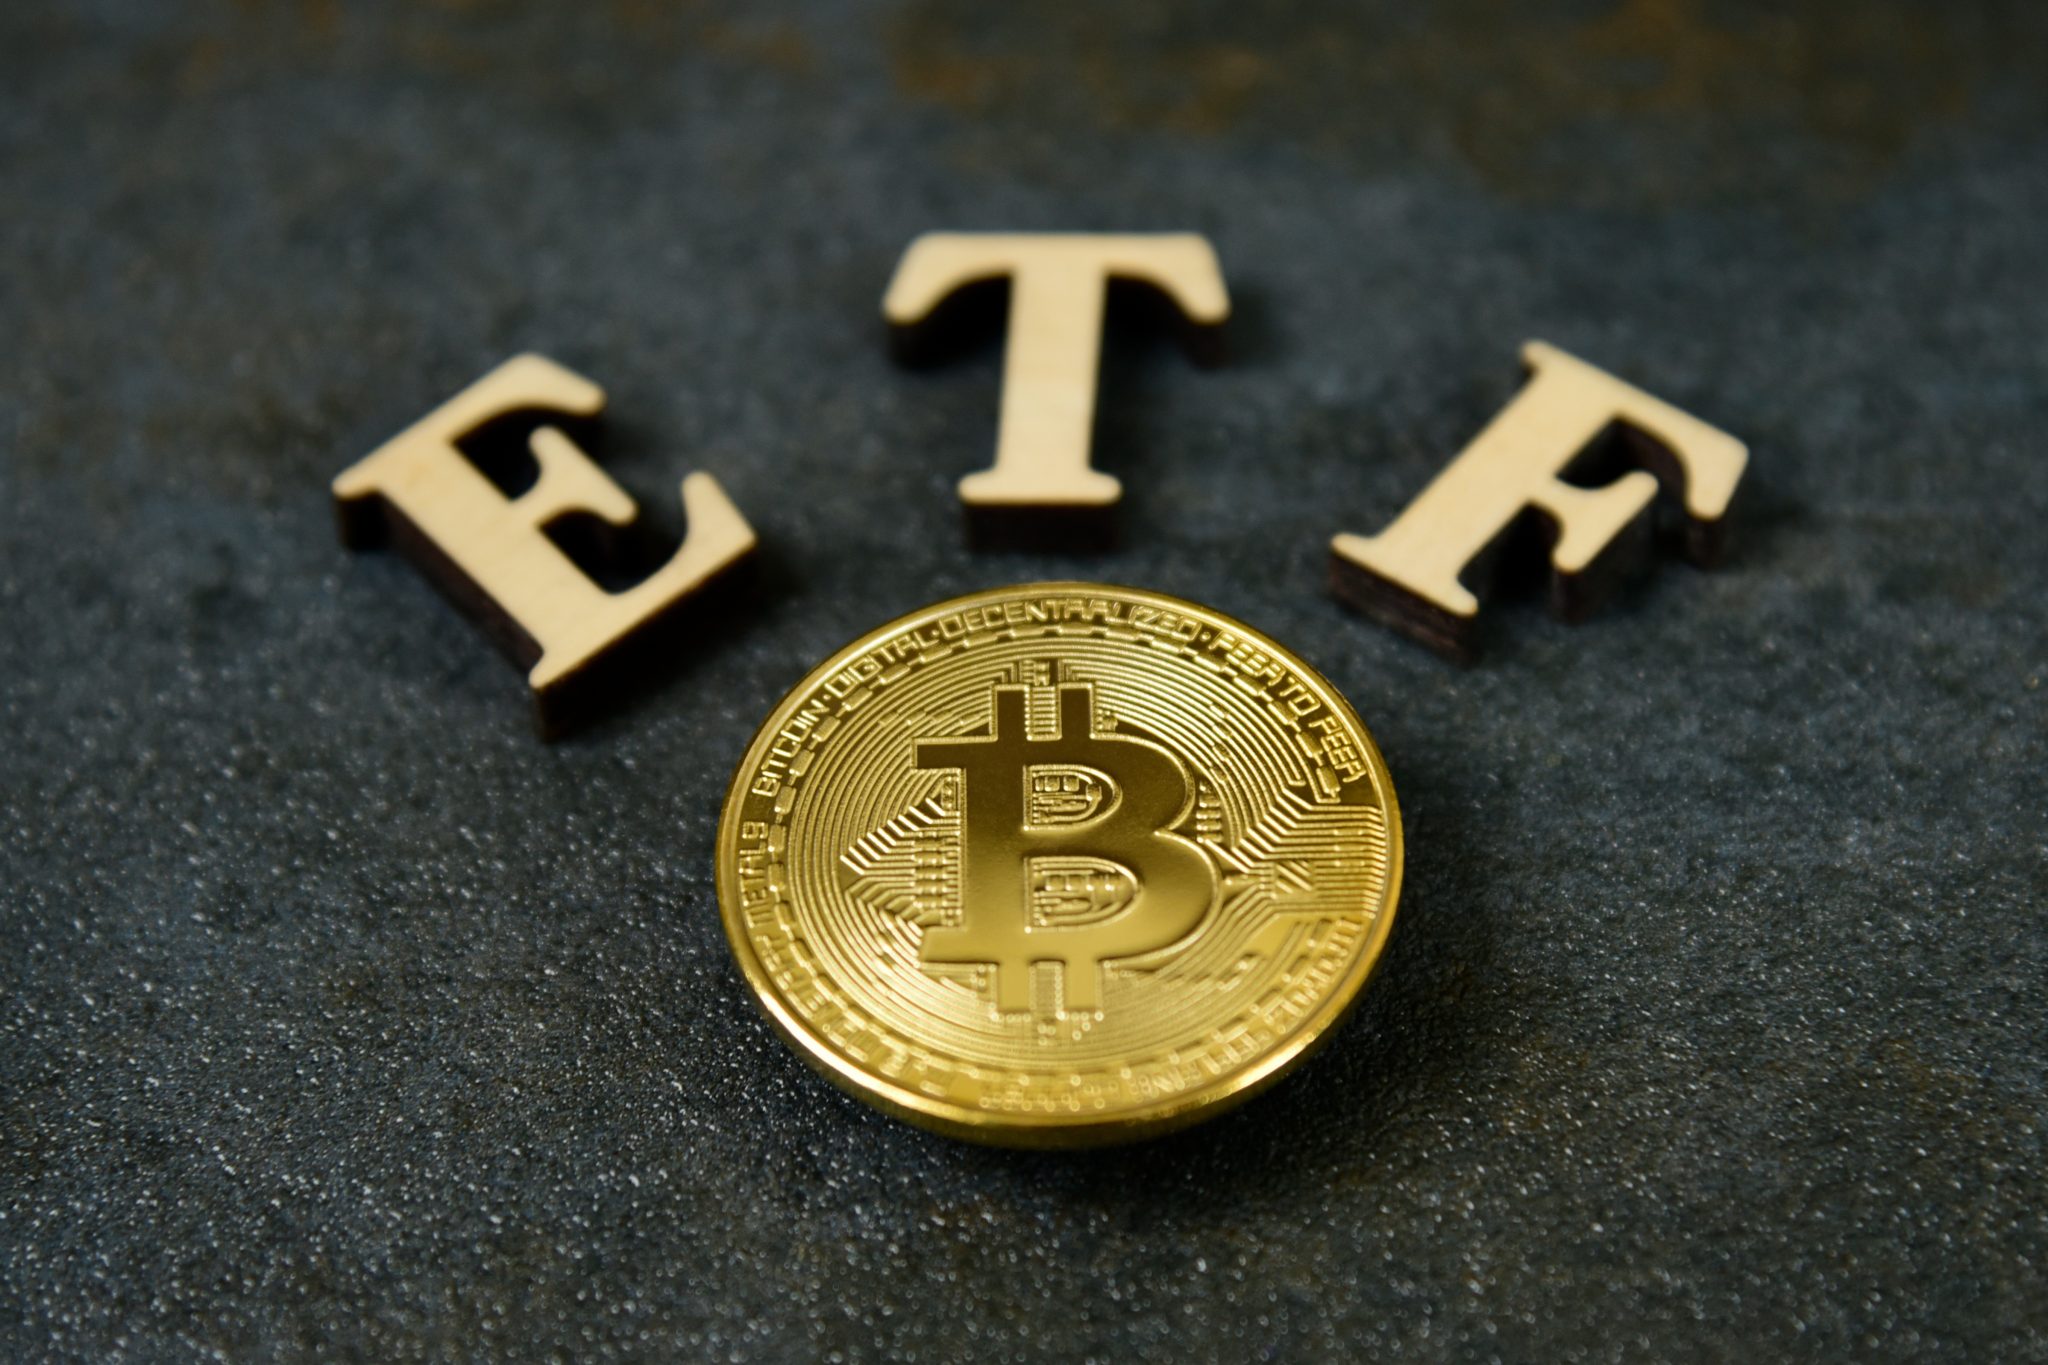 Bitcoin coin with ETF text on stone background